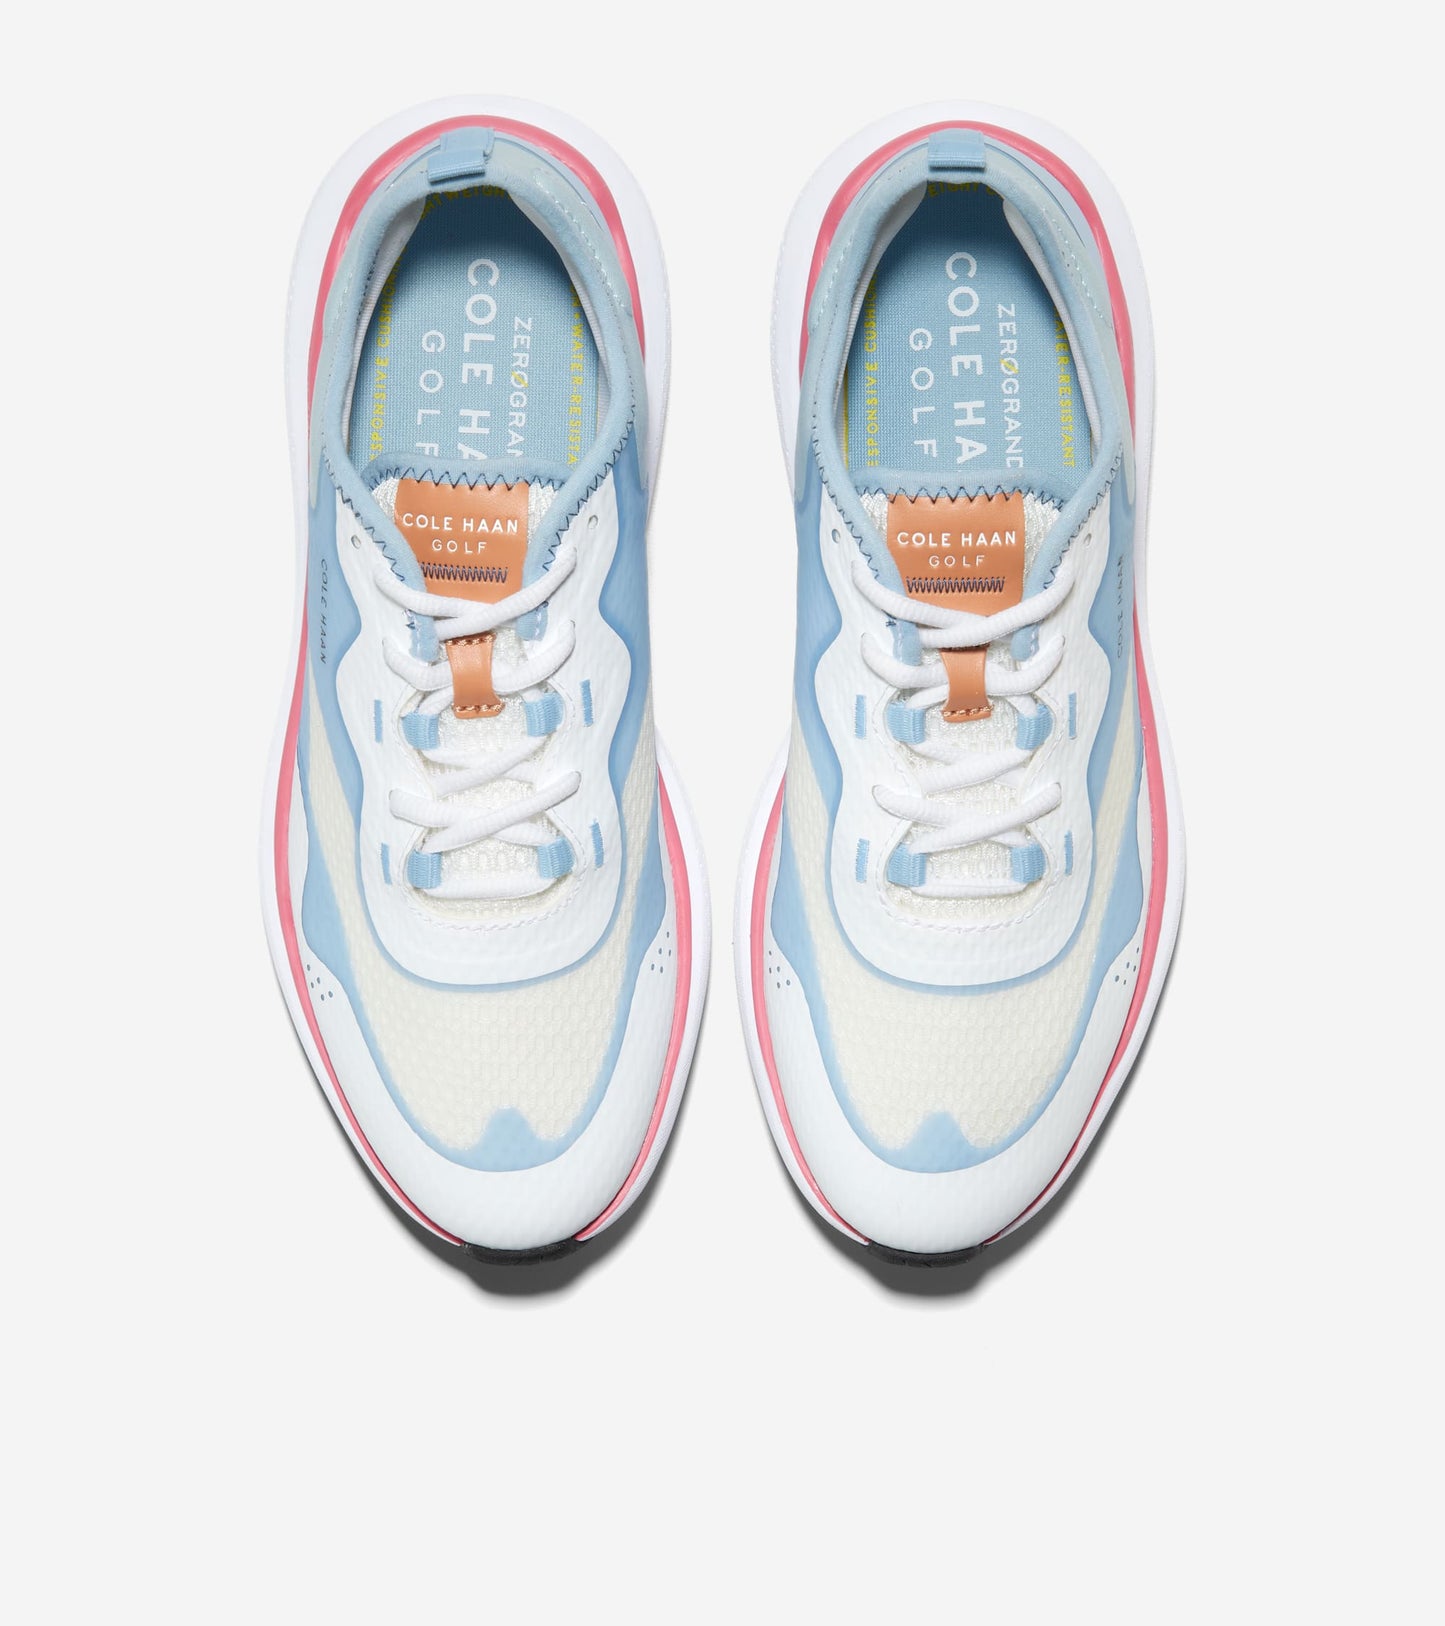 W26783:OPTIC WHITE/BLUE BELL/SUN KISSED CORAL (8086477111543)